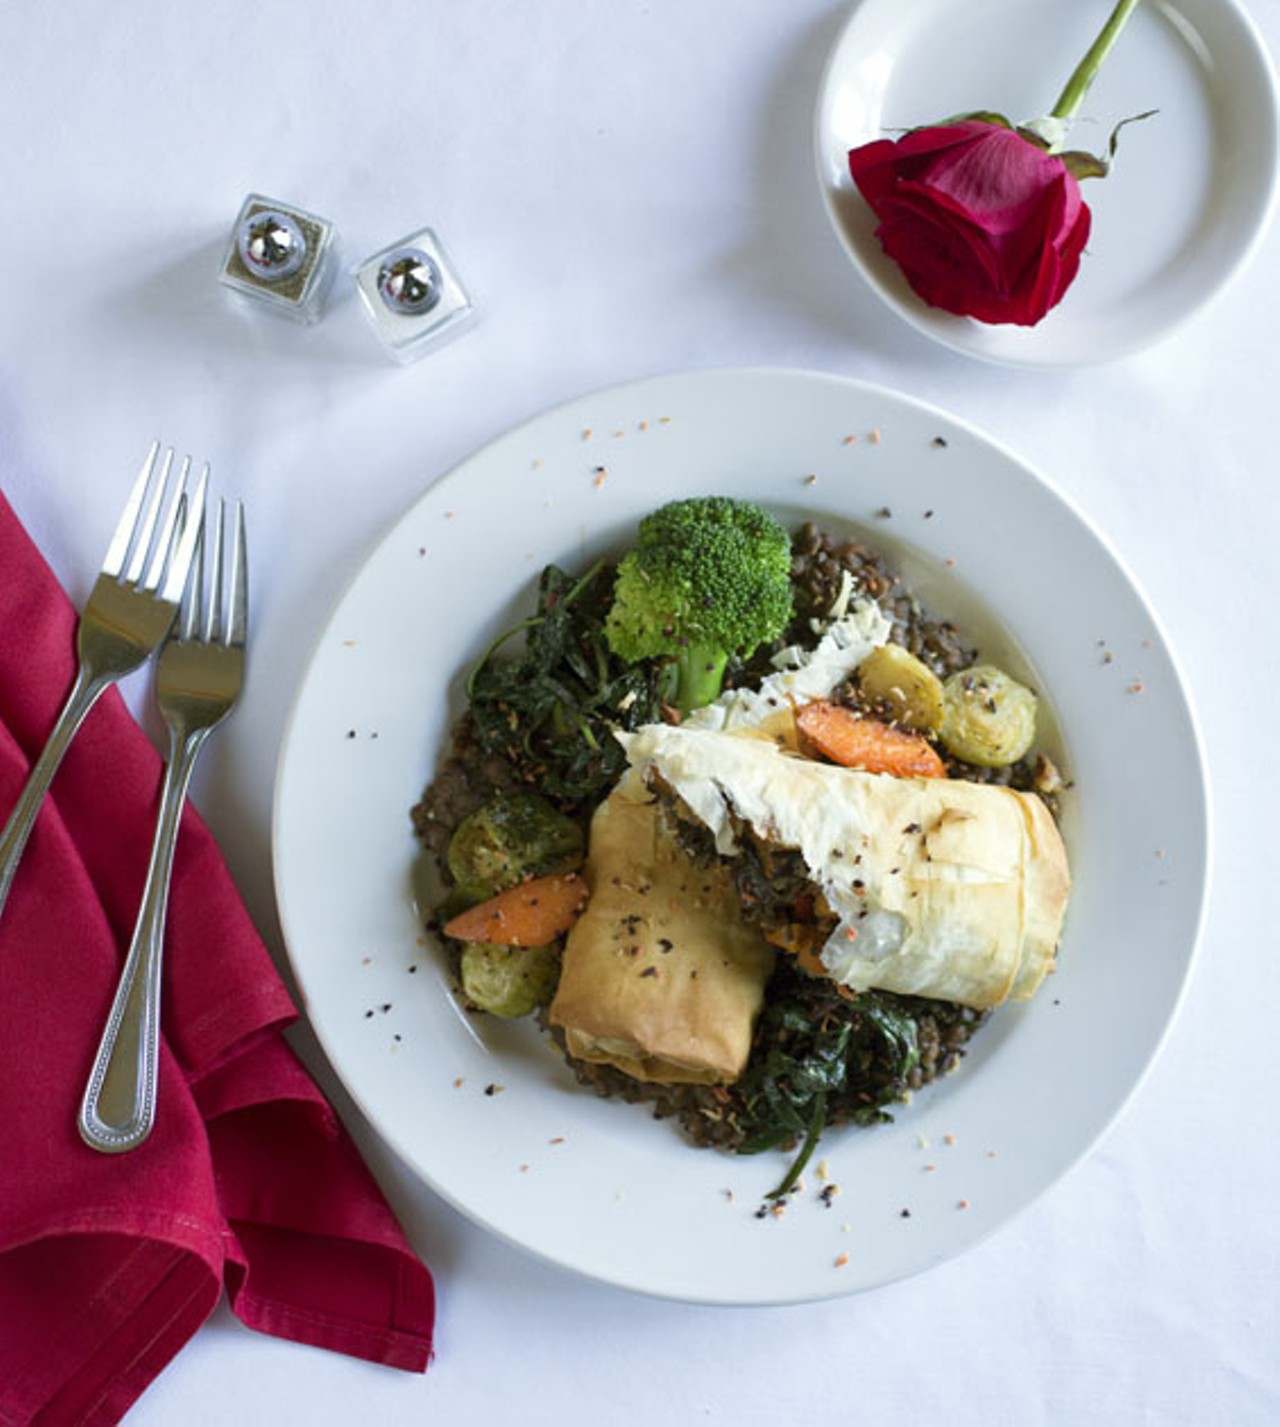 The "Vegetarian Winter Roulade" is roasted vegetables and wild-rice phyllo roulade and lentil Dijonnaise.